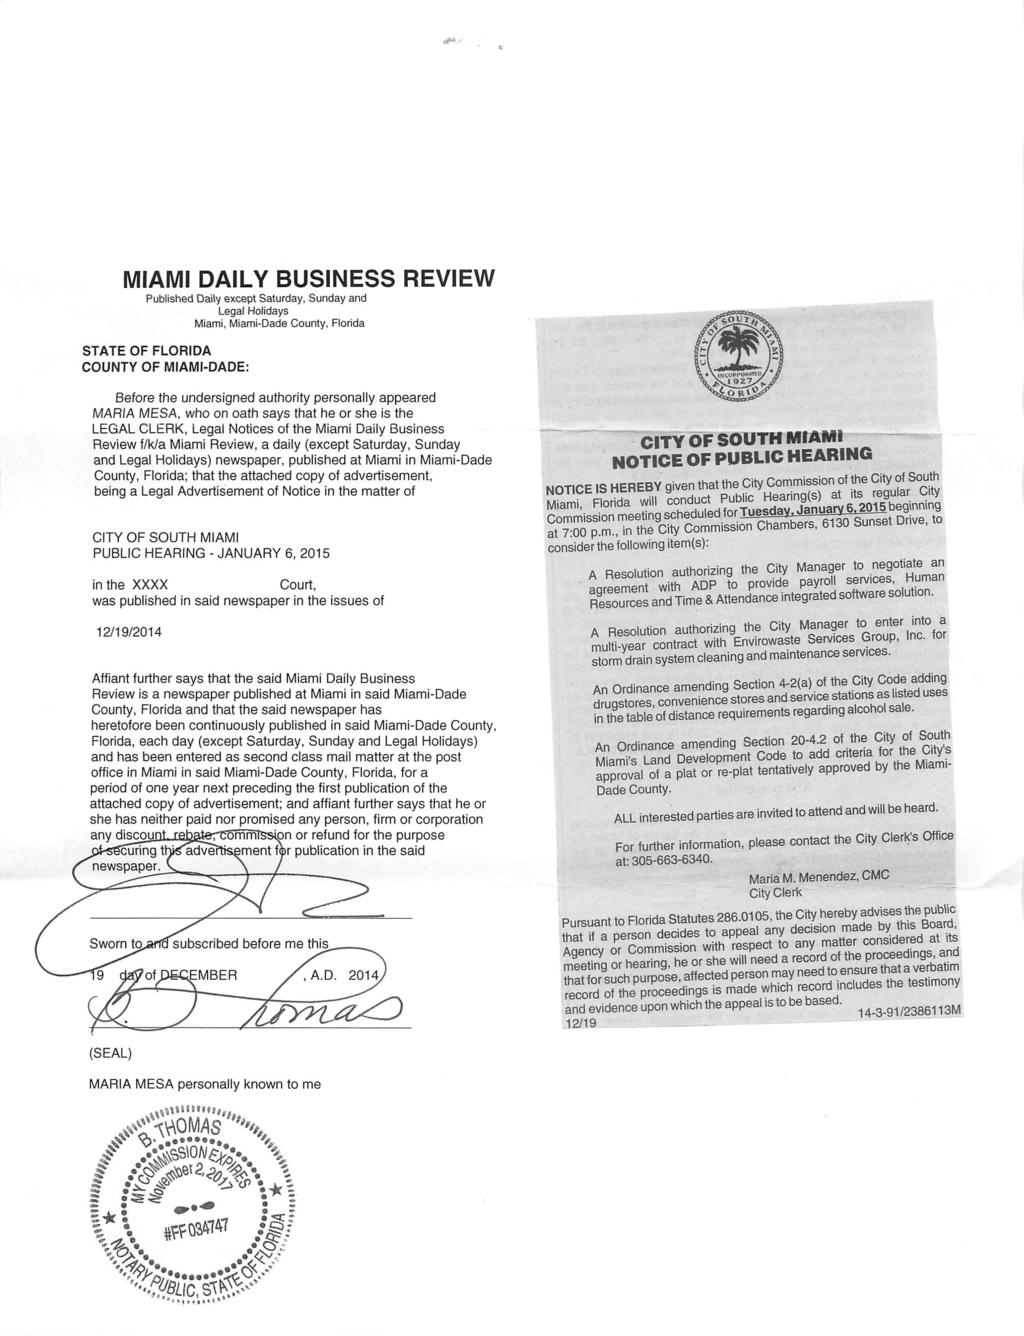 MIAMI DAILY BUSINESS REVIEW Published Daily except Saturday, Sunday and Legal Holidays Miami, Miami-Dade County, Florid a STATE OF FLORIDA COUNTY OF MIAMI-DADE: Before the undersigned authority